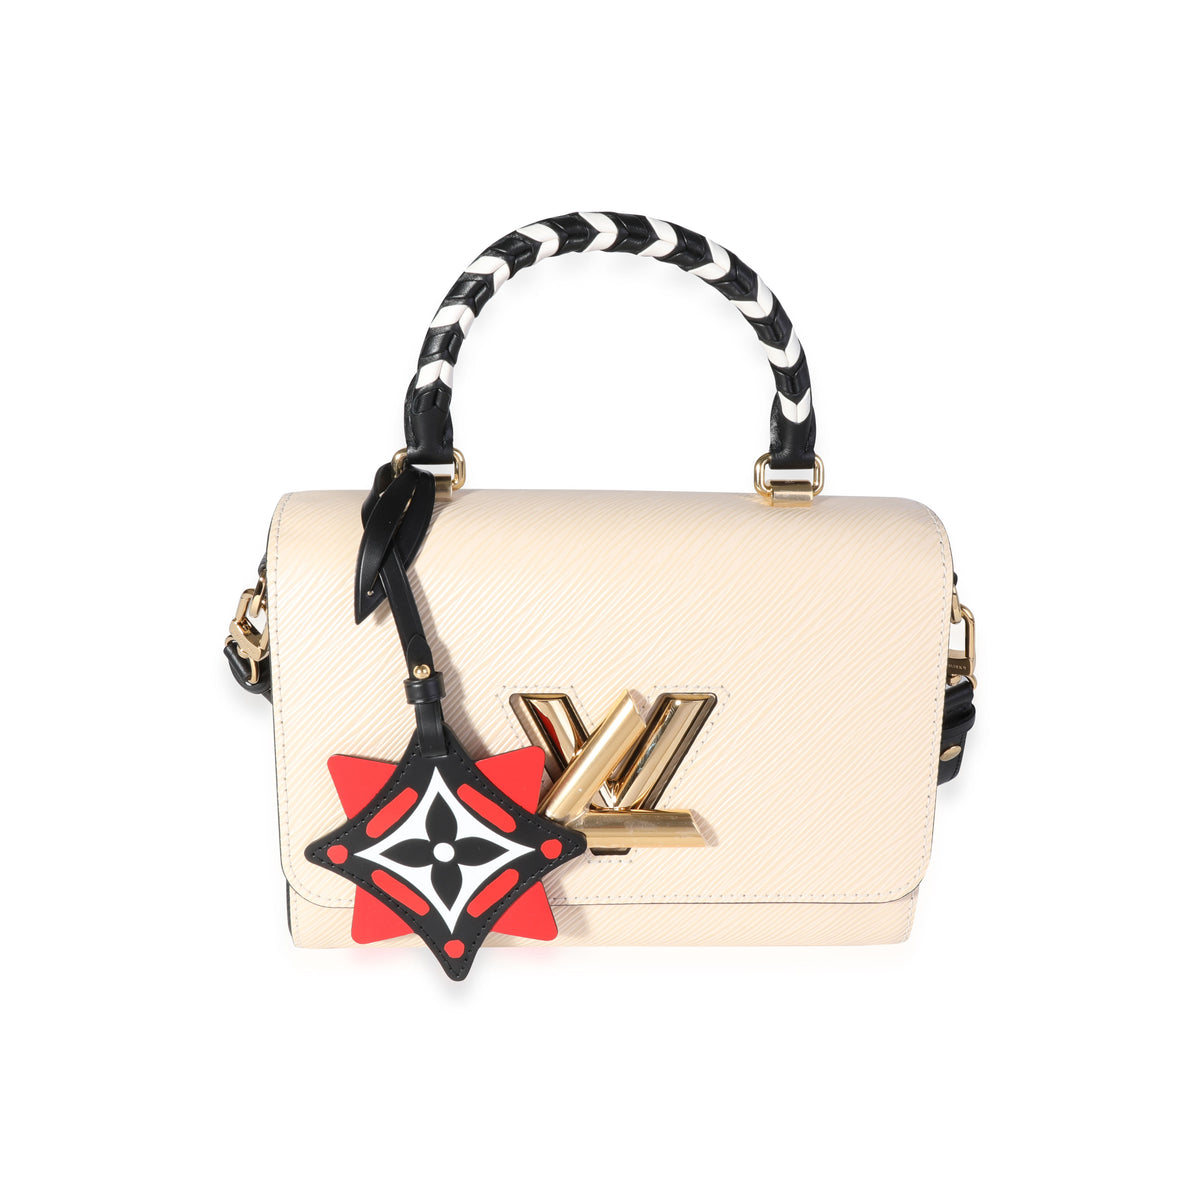 Louis Vuitton Twist Bag with Top Handle, Beige and Black Epi Leather, Gold  Hardware, Preowned in Dustbag